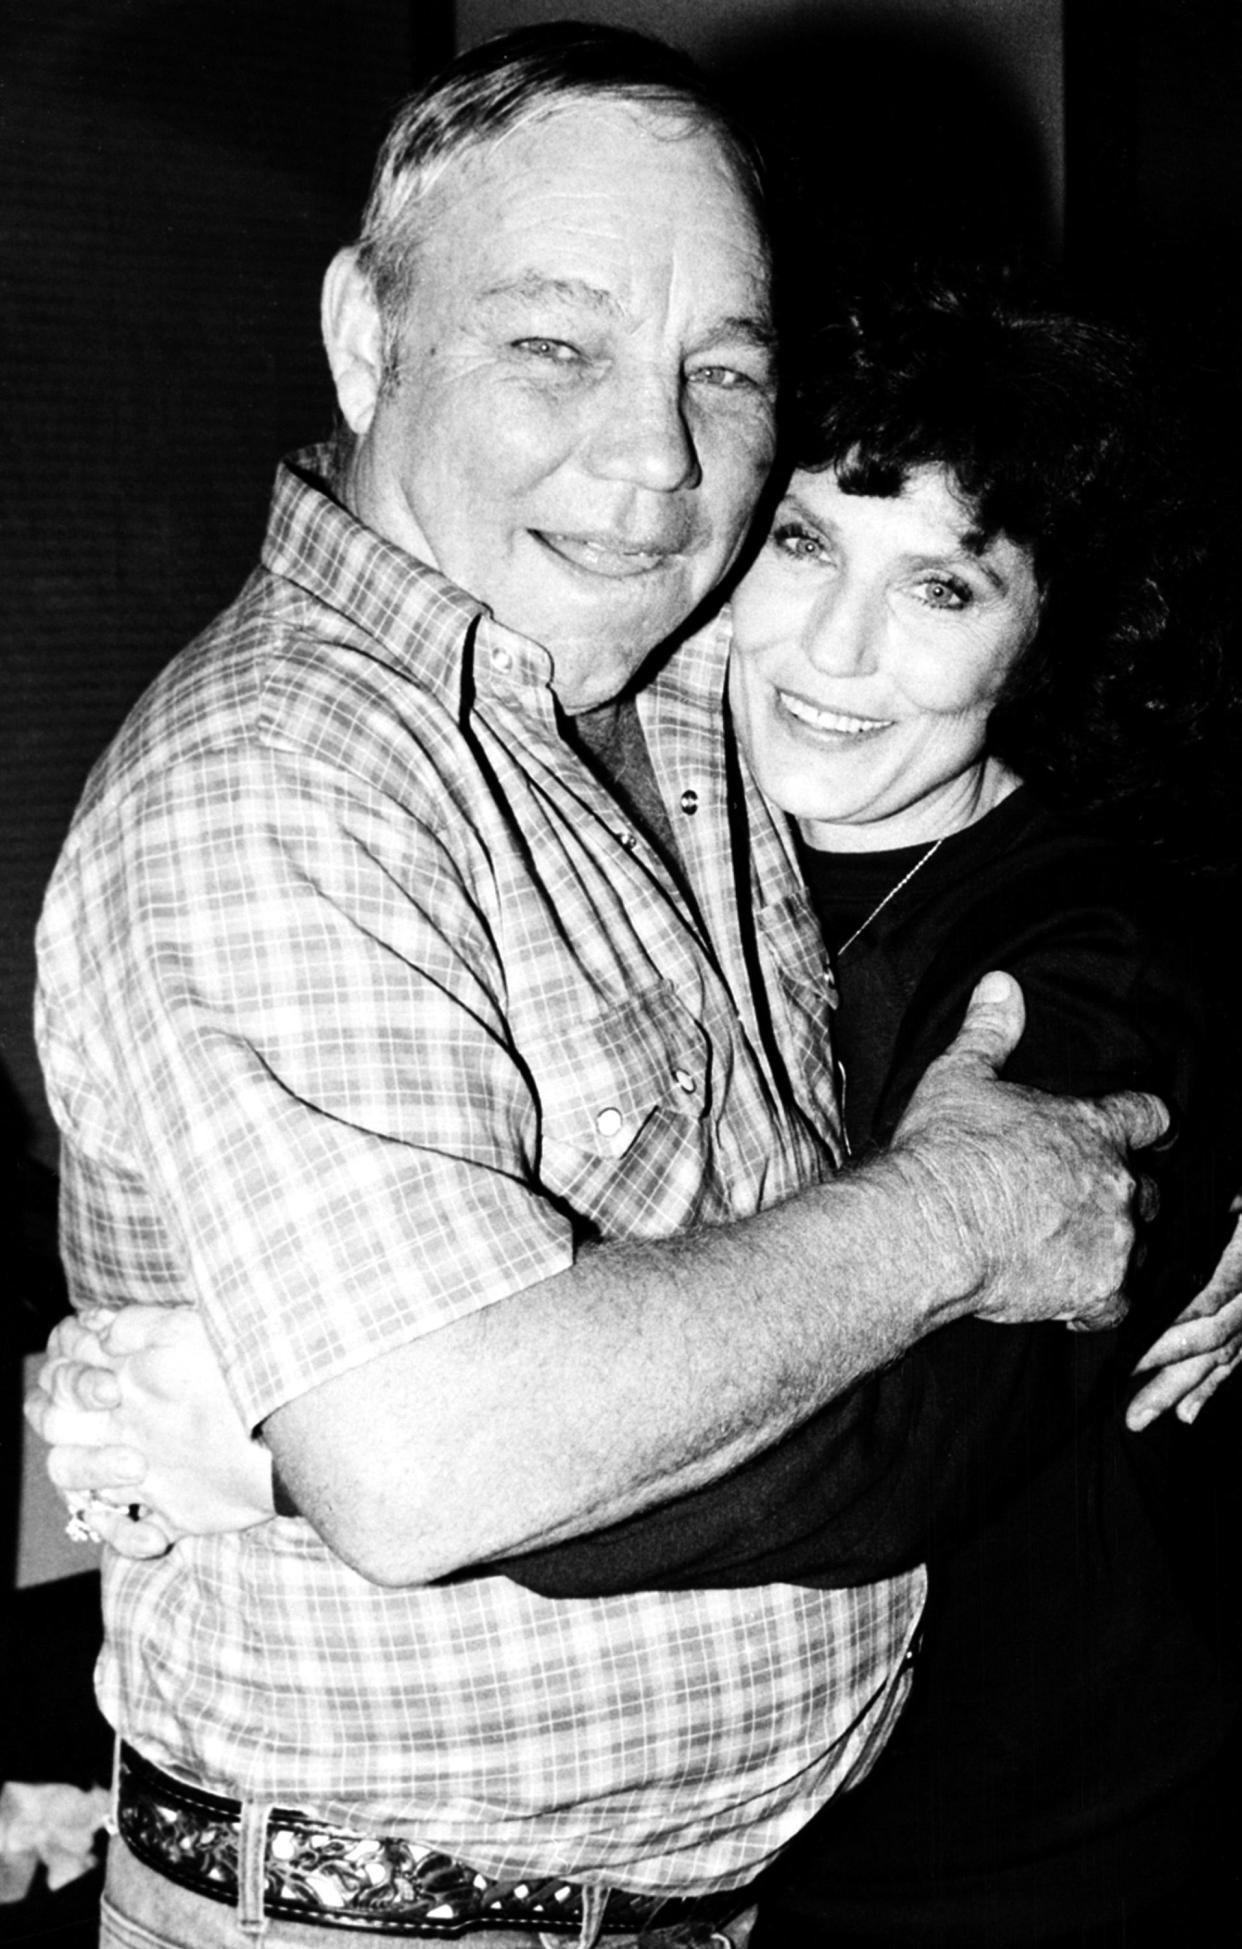 Country music singer Loretta Lynn gets a hug from her husband, Oliver "Mooney" Lynn, during rehearsal for her New York debut, Thursday, Oct. 21, 1982.  Lynn will perform at the Majestic Theatre for the benefit of the National Committee for the Prevention of Child Abuse.  (AP Photo/Antonio Carozza)